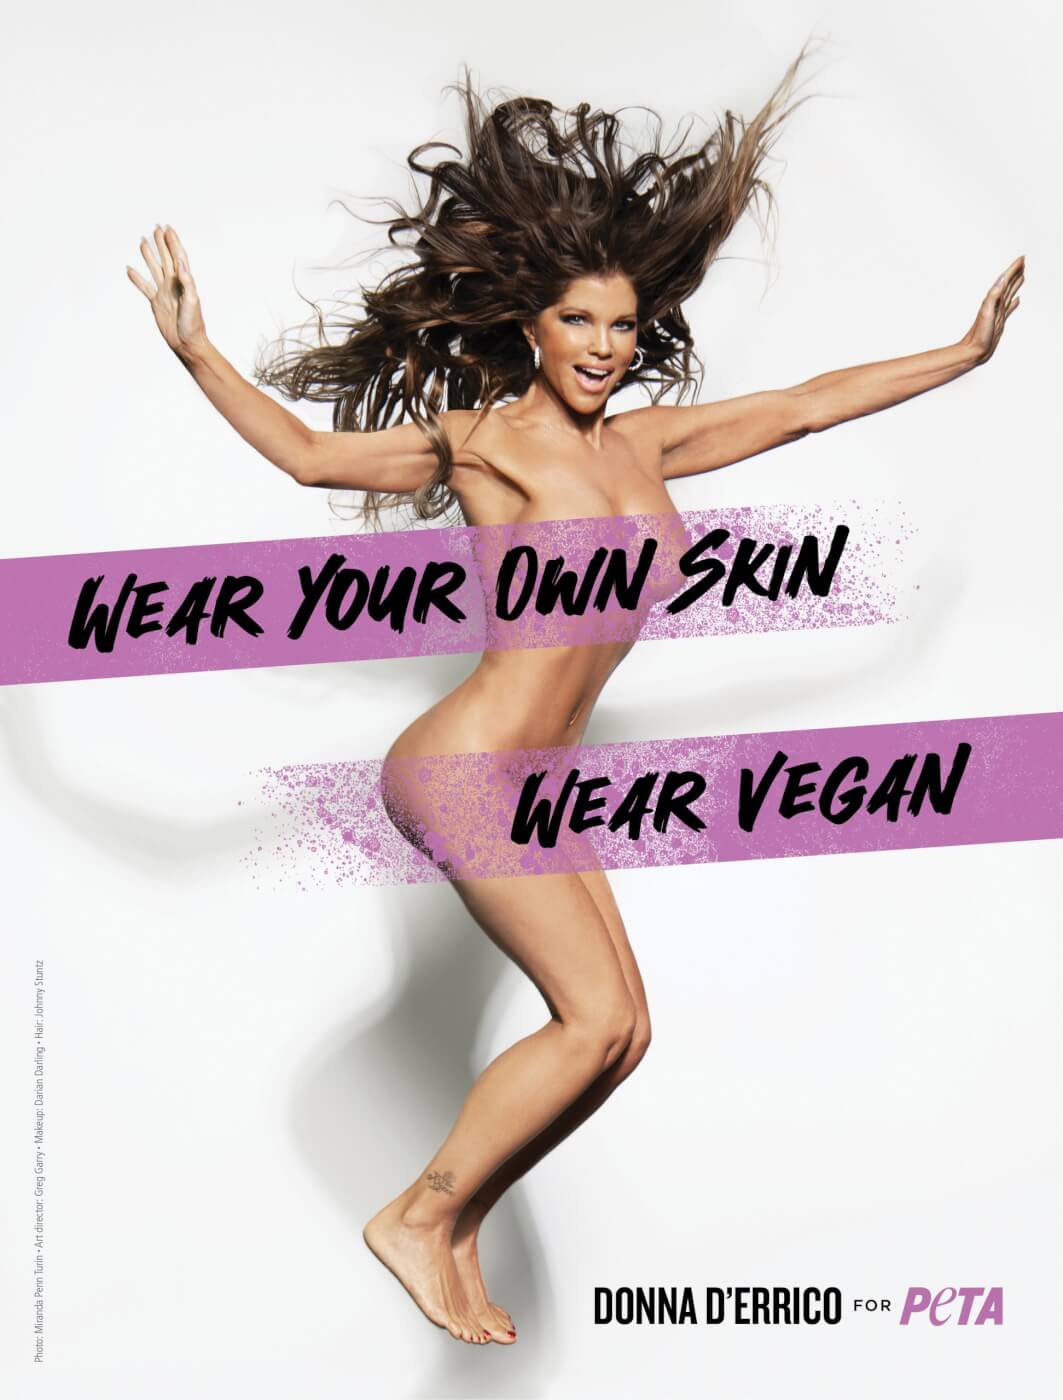 peta donna derrico ad img banner scaled ‘Wear Your Own Skin!’ Donna D’Errico Celebrates Her Birthday Suit in New PETA Campaign